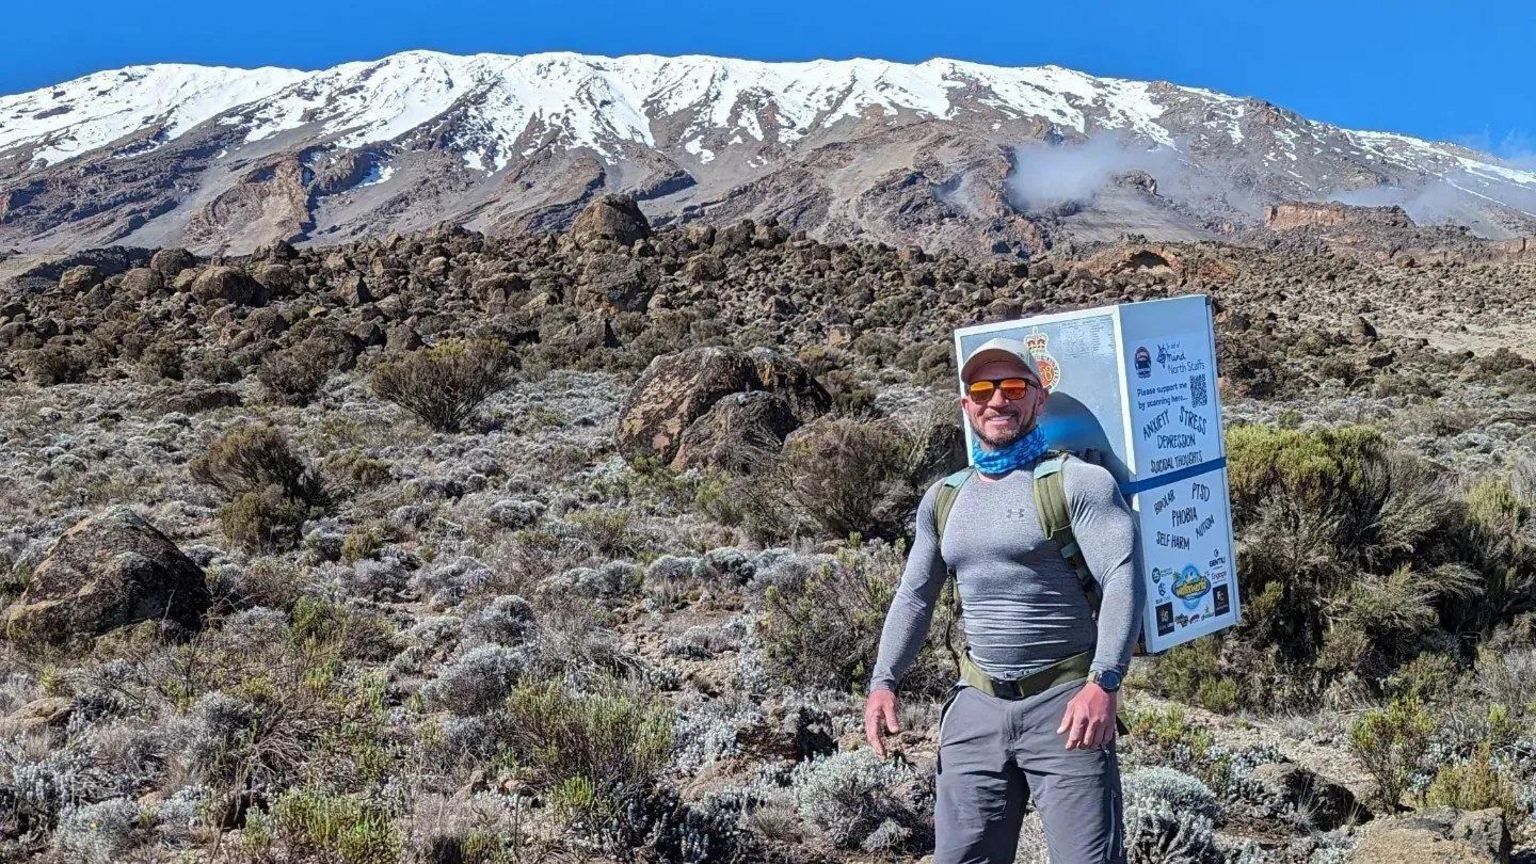 Michael Copeland carrying a fridge with Mount Kilimanjaro in the background